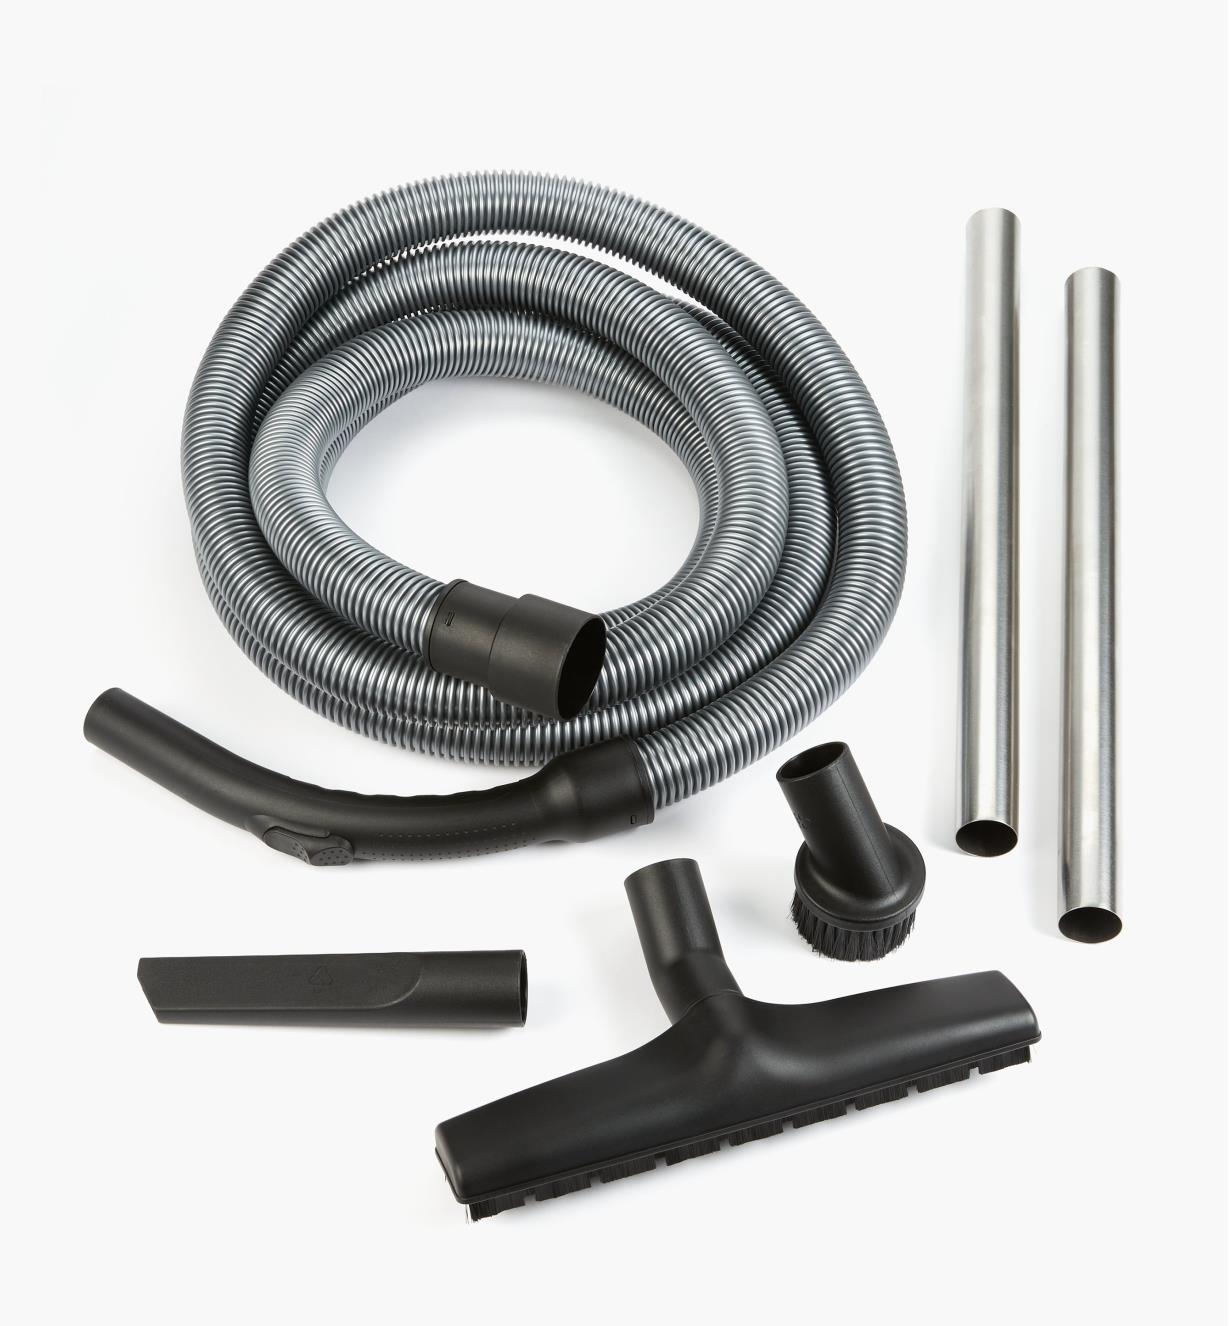 08K2540 - Mirka Clean-Up Kit for Dust Extractors